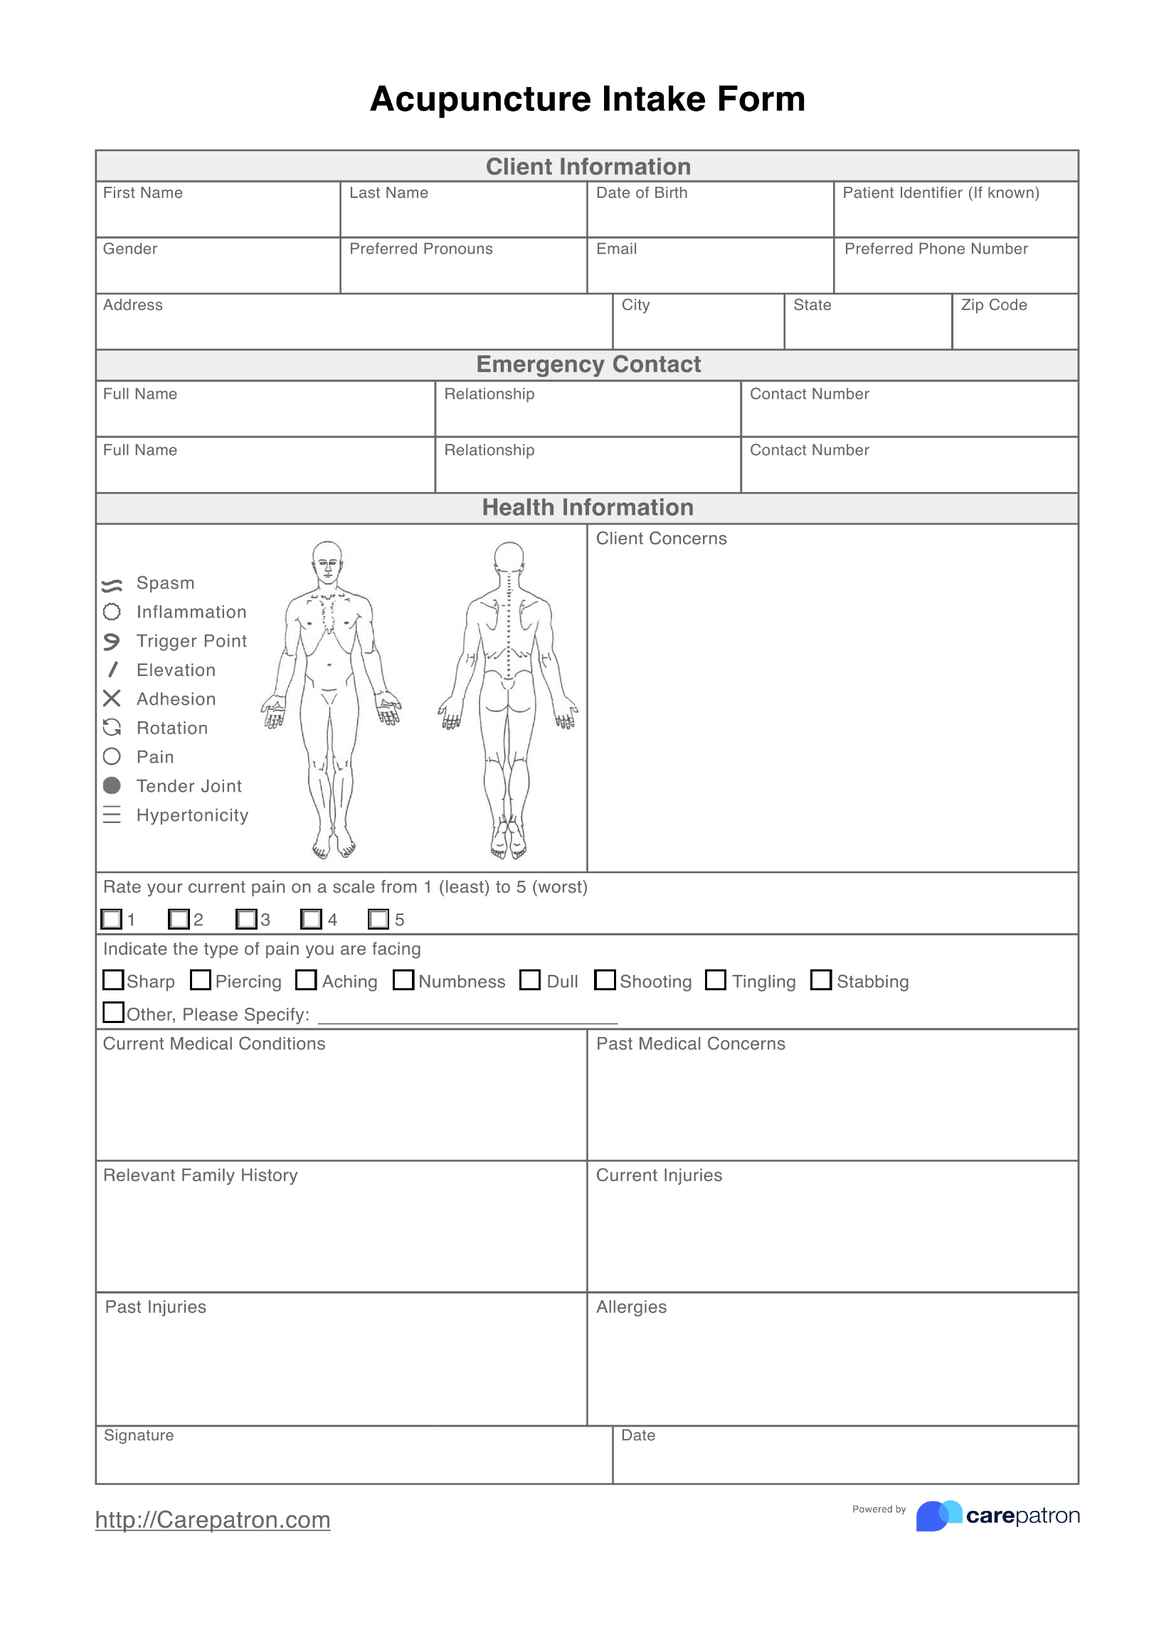 Acupuncture Intake Form PDF Example